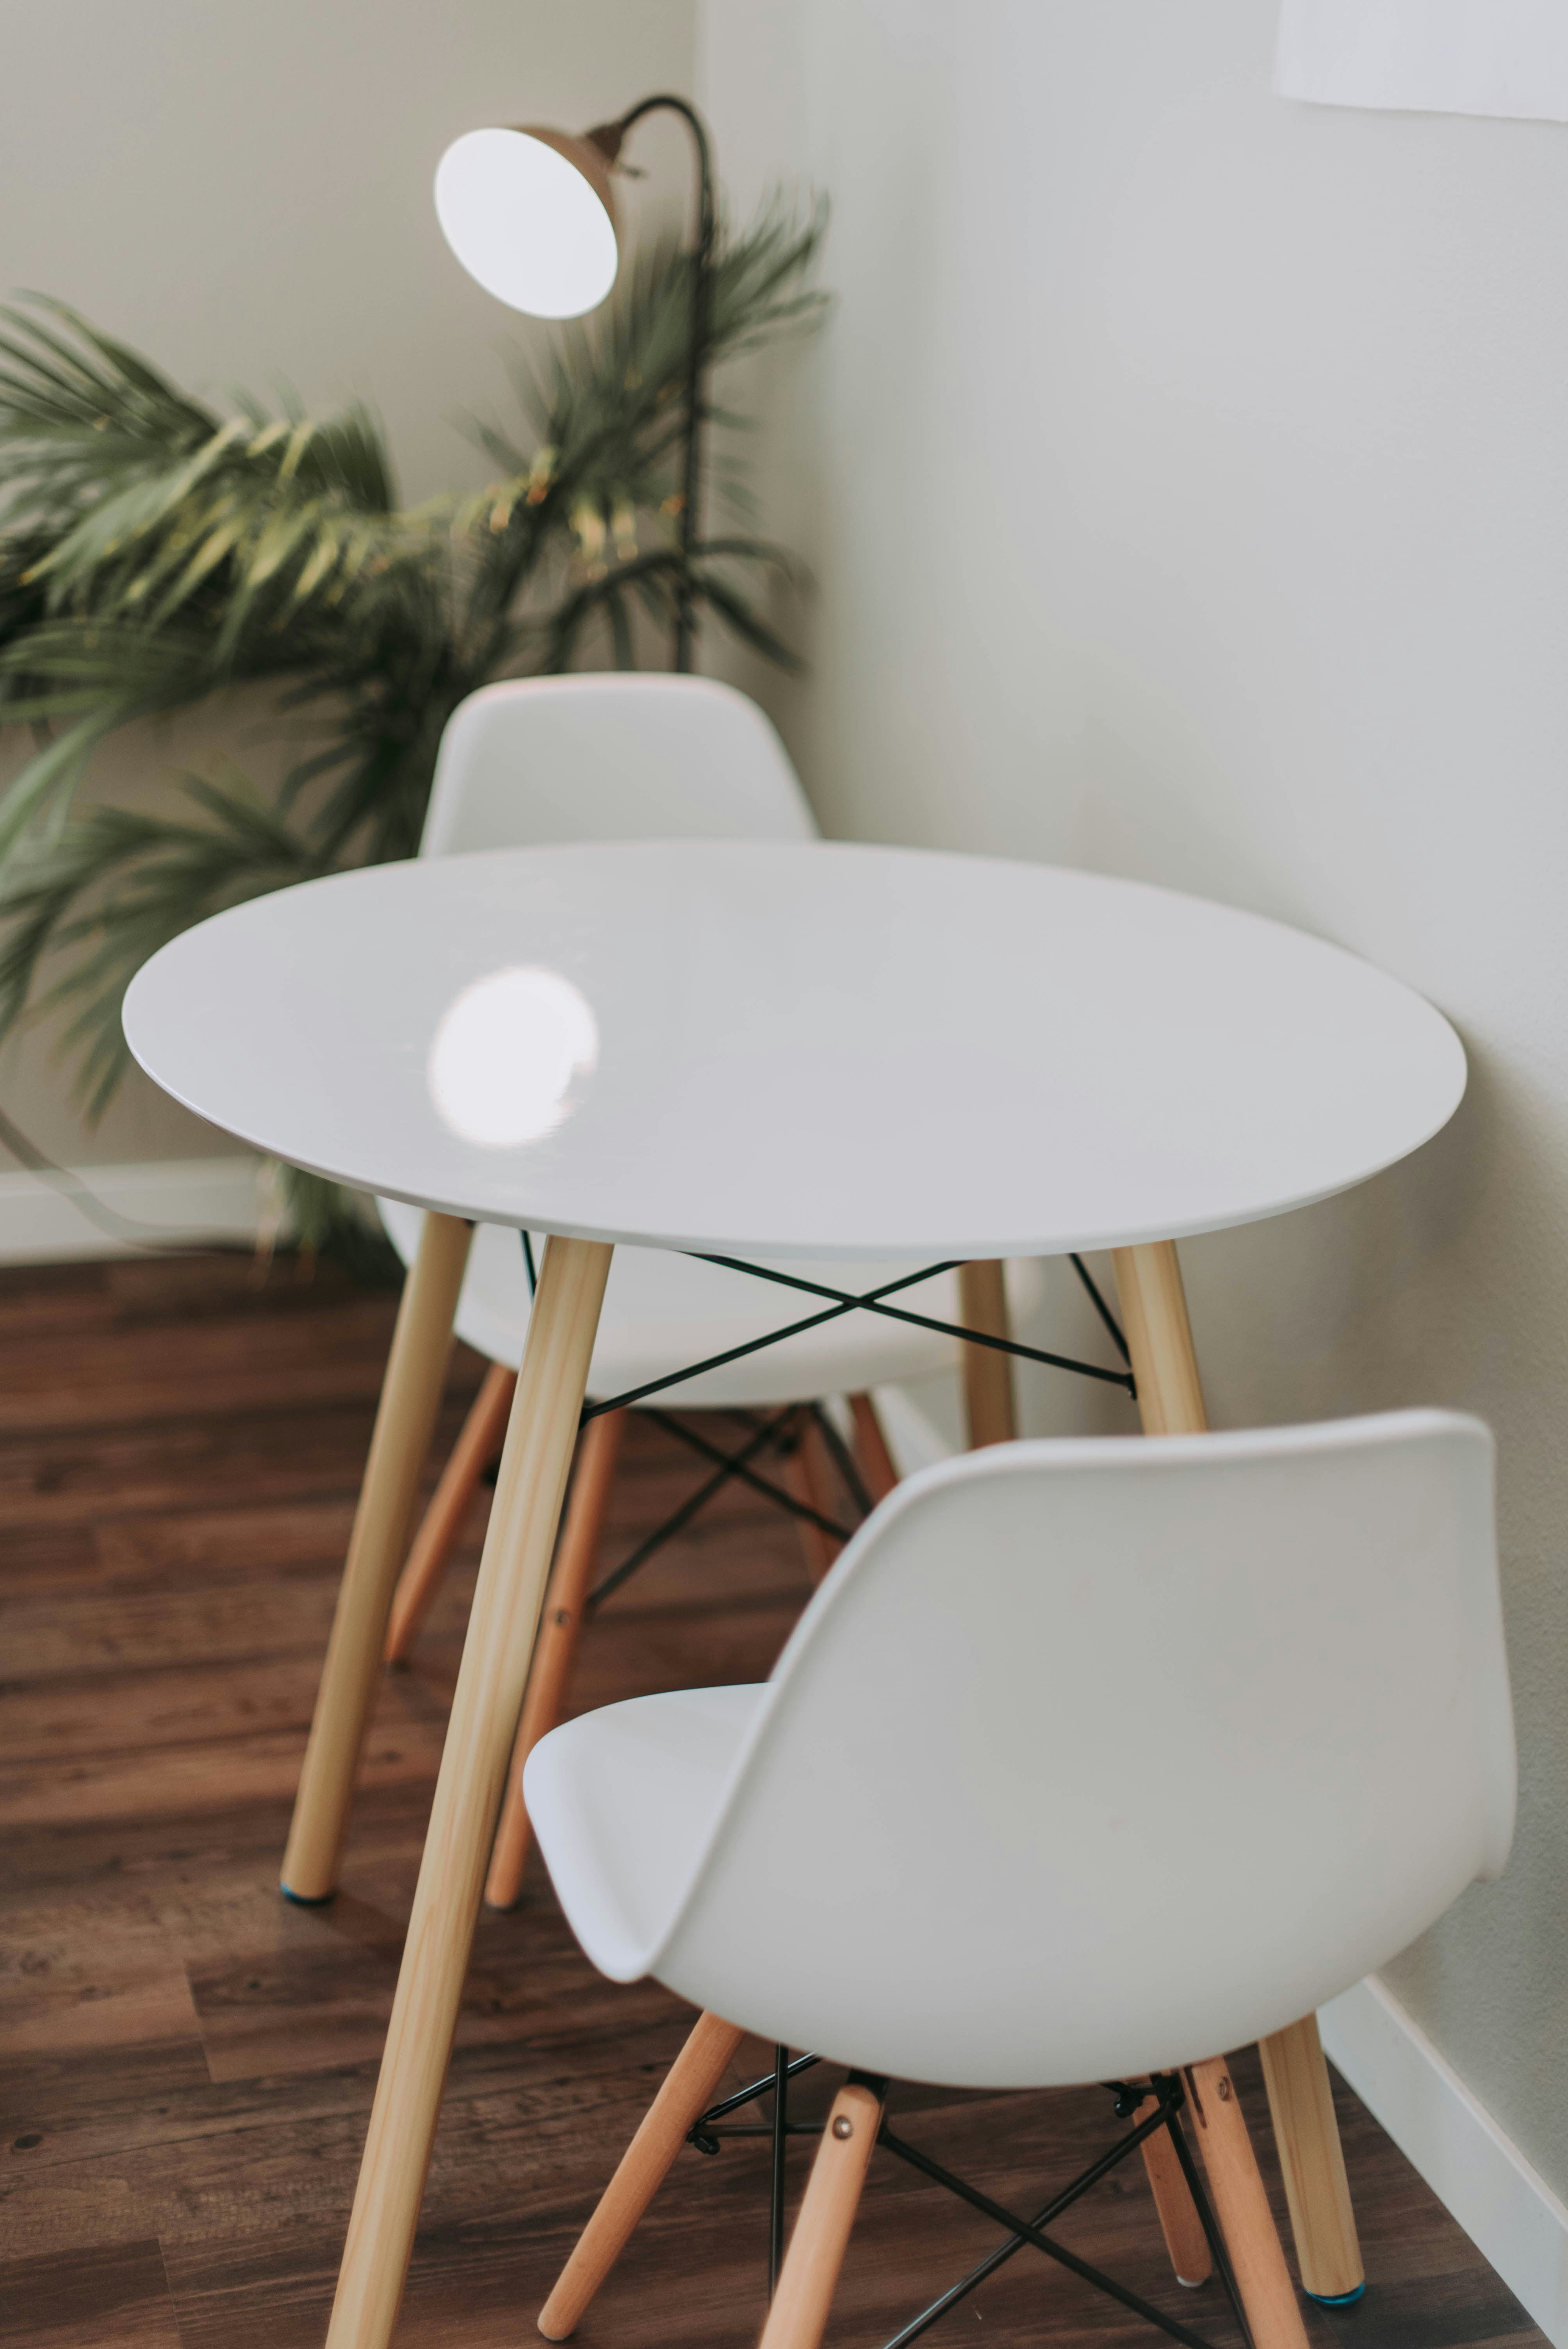 White table with two white chairs